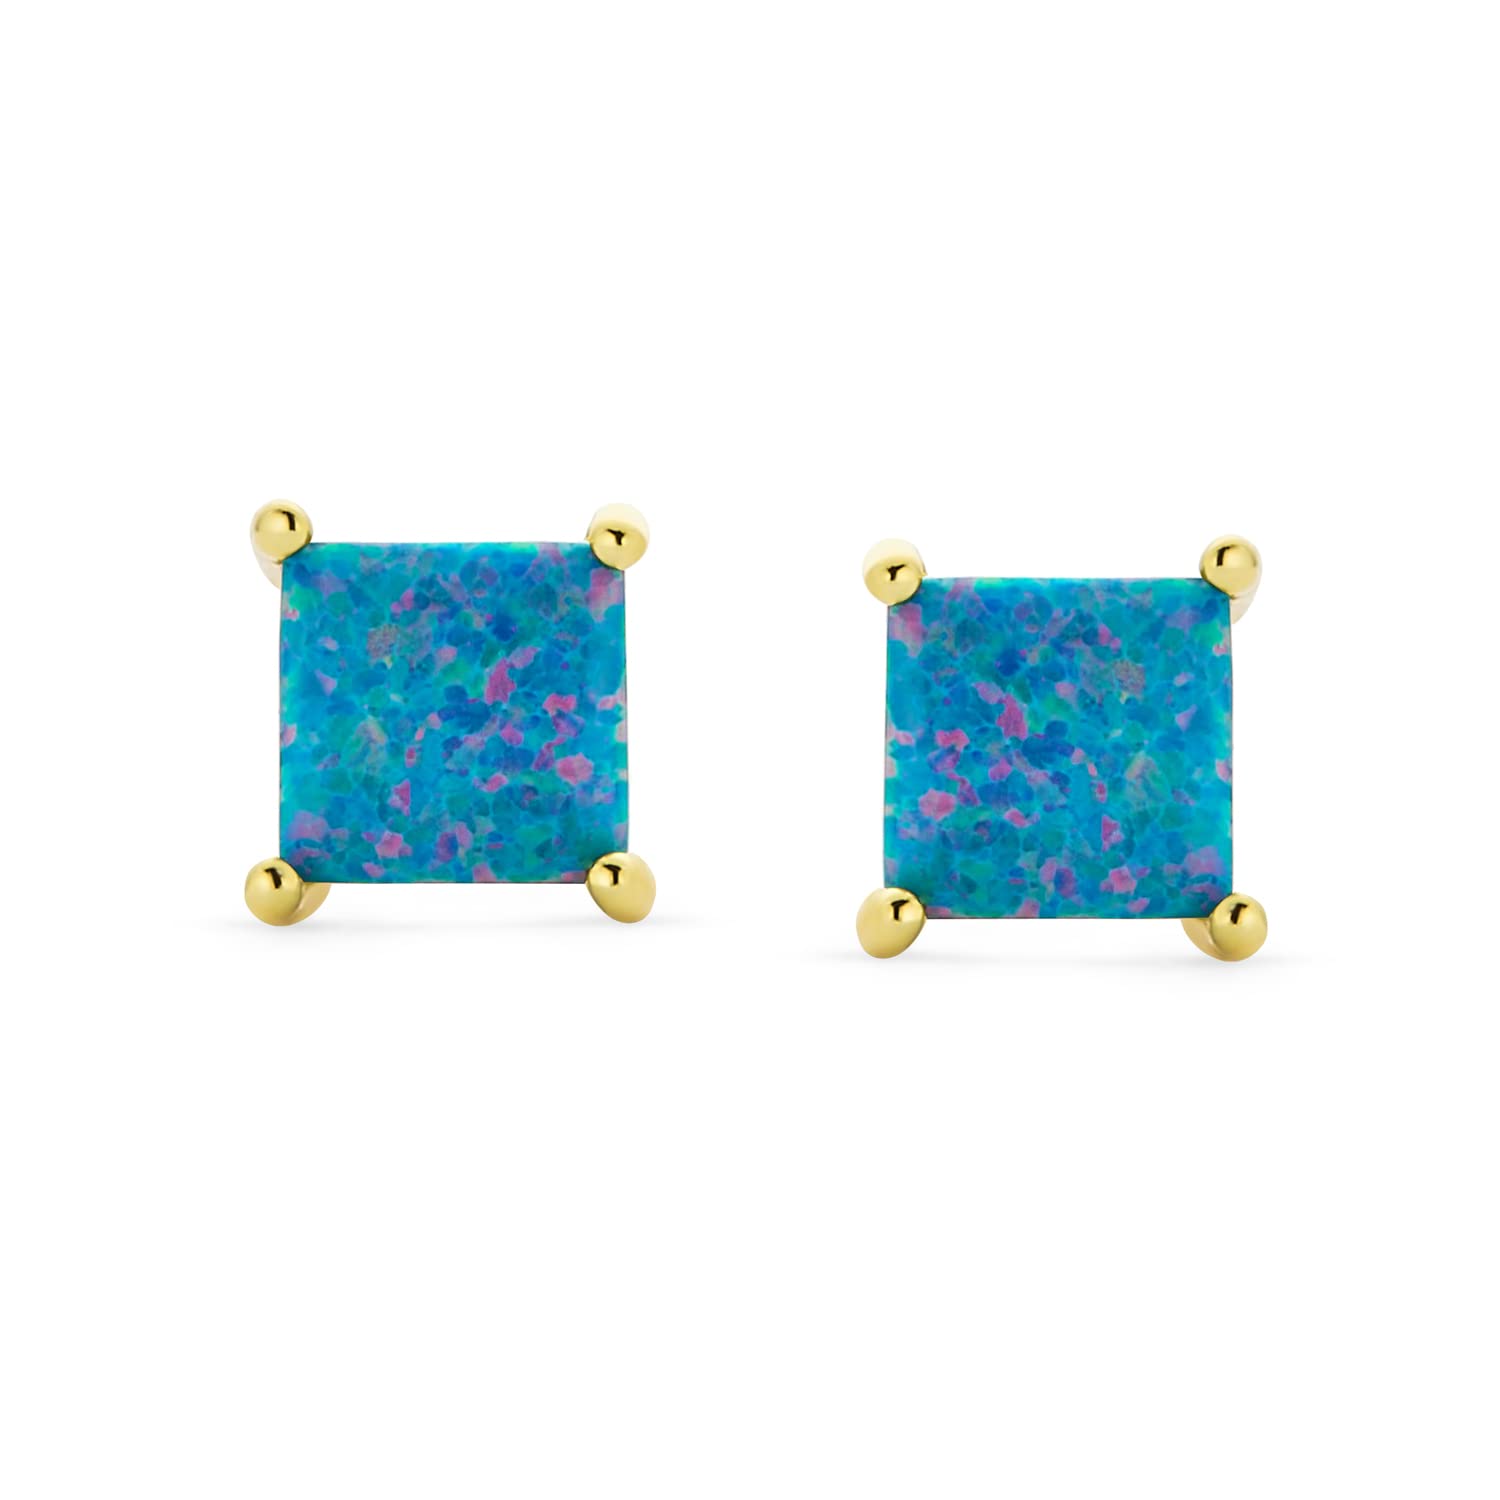 Simple Classic White Fire Orange Green Blue Opulence Gemstone Created Opal Square Princess Cut Stud Earrings 14K Yellow Gold Plated .925 Sterling Silver 5MM October Birthstone